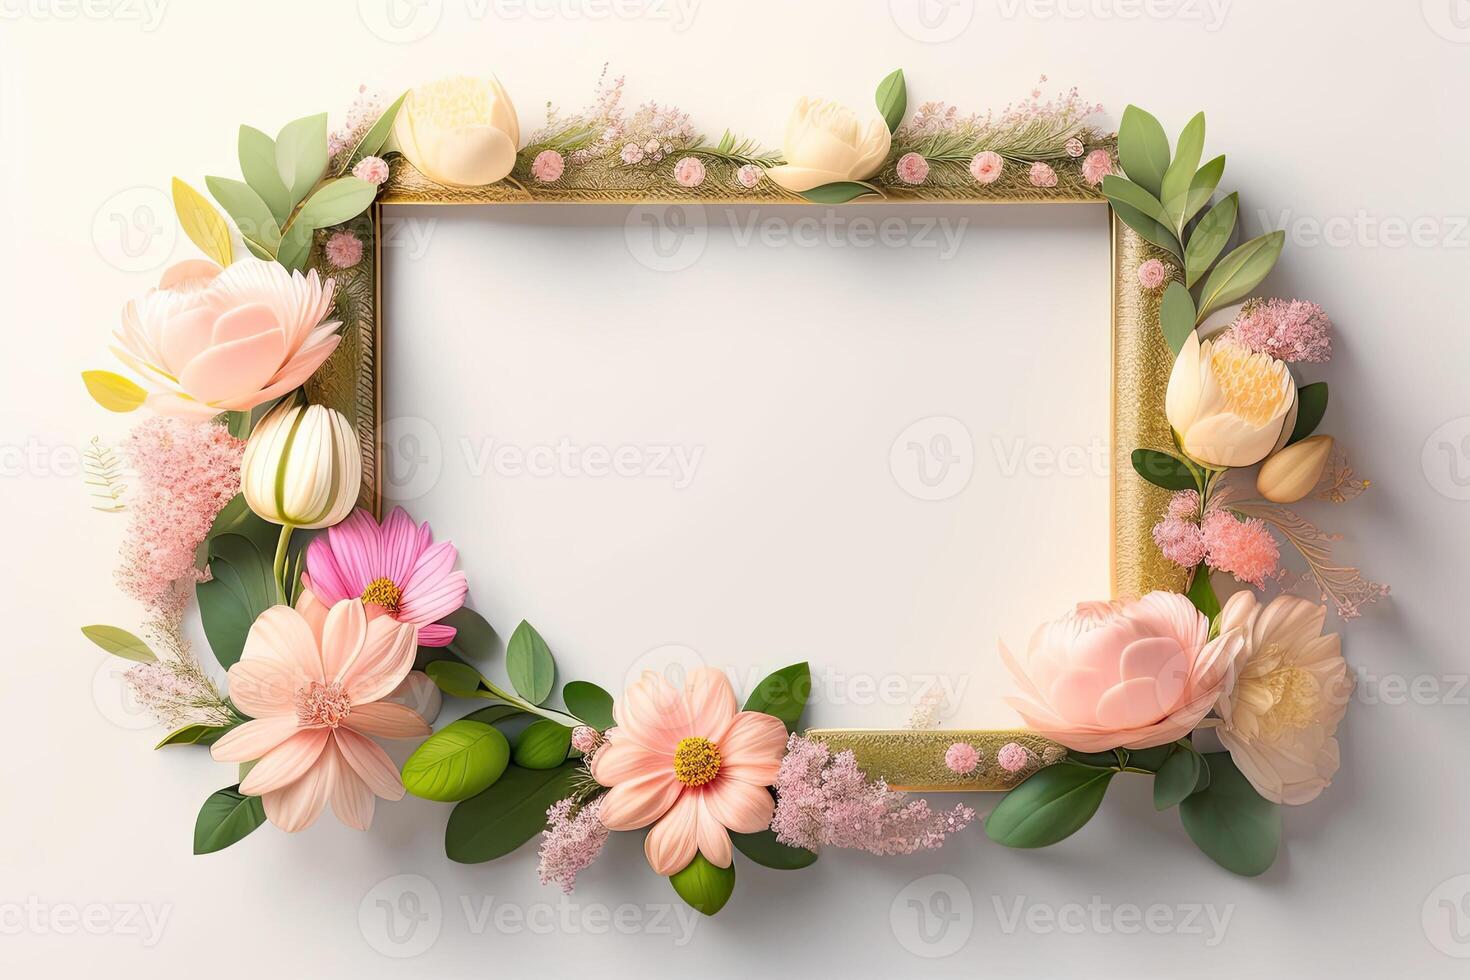 Frame Background Decorated with Flower Ornament photo